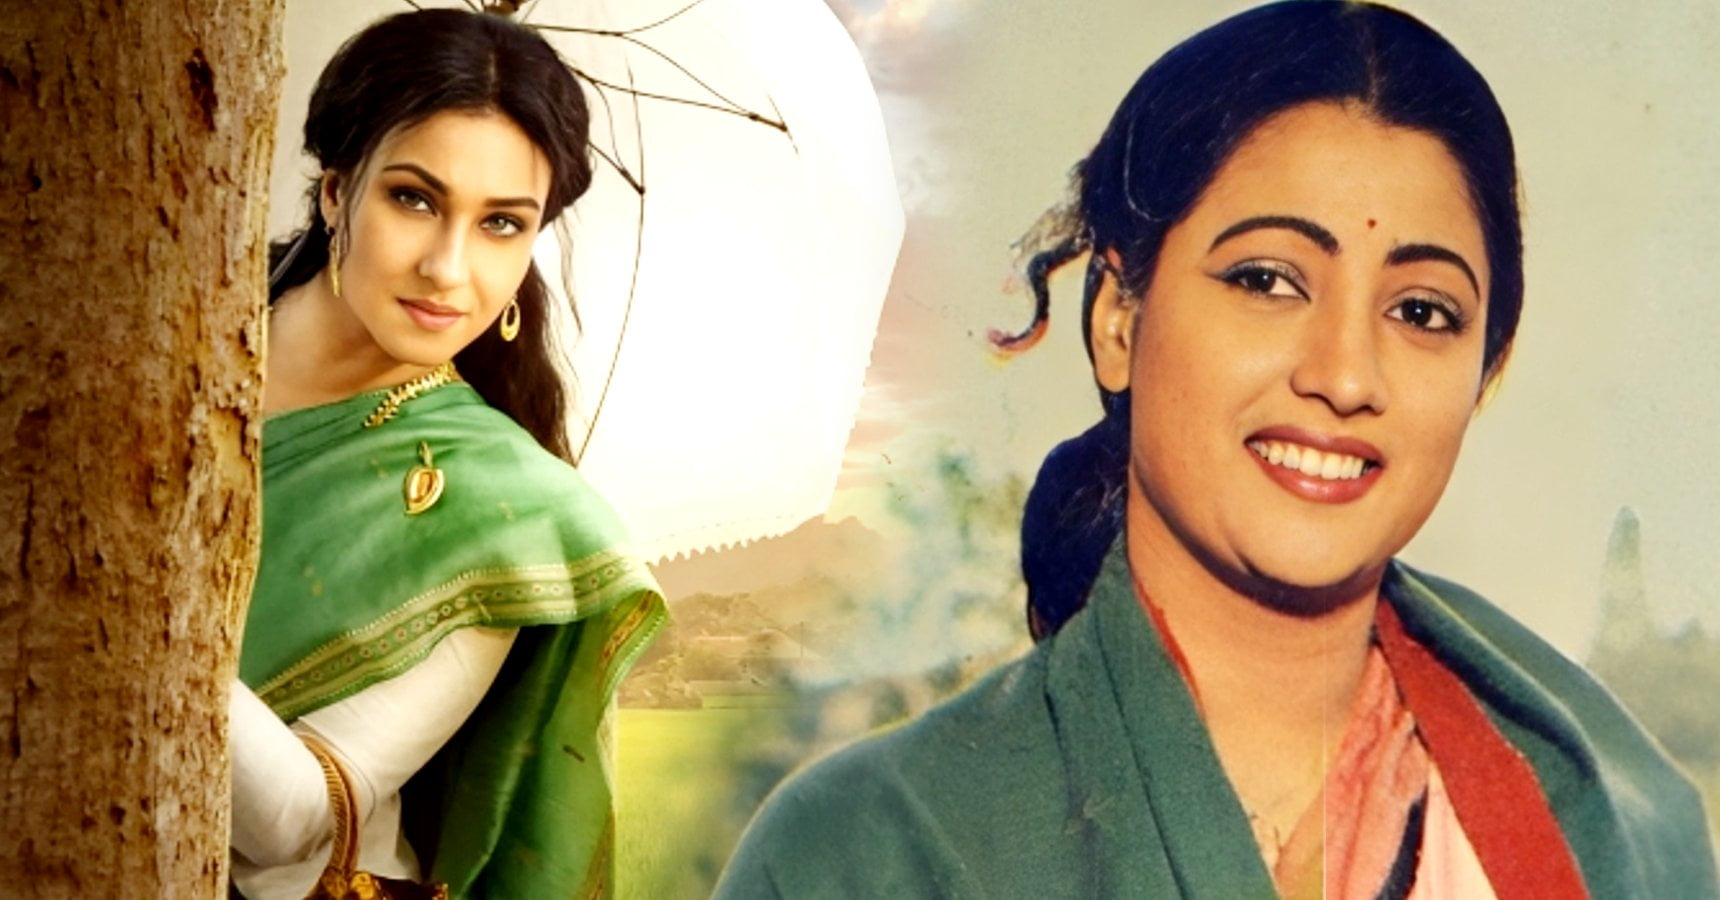 Tollywood actress Rituparna Sengupta is playing Datta which was played by Suchitra Sen